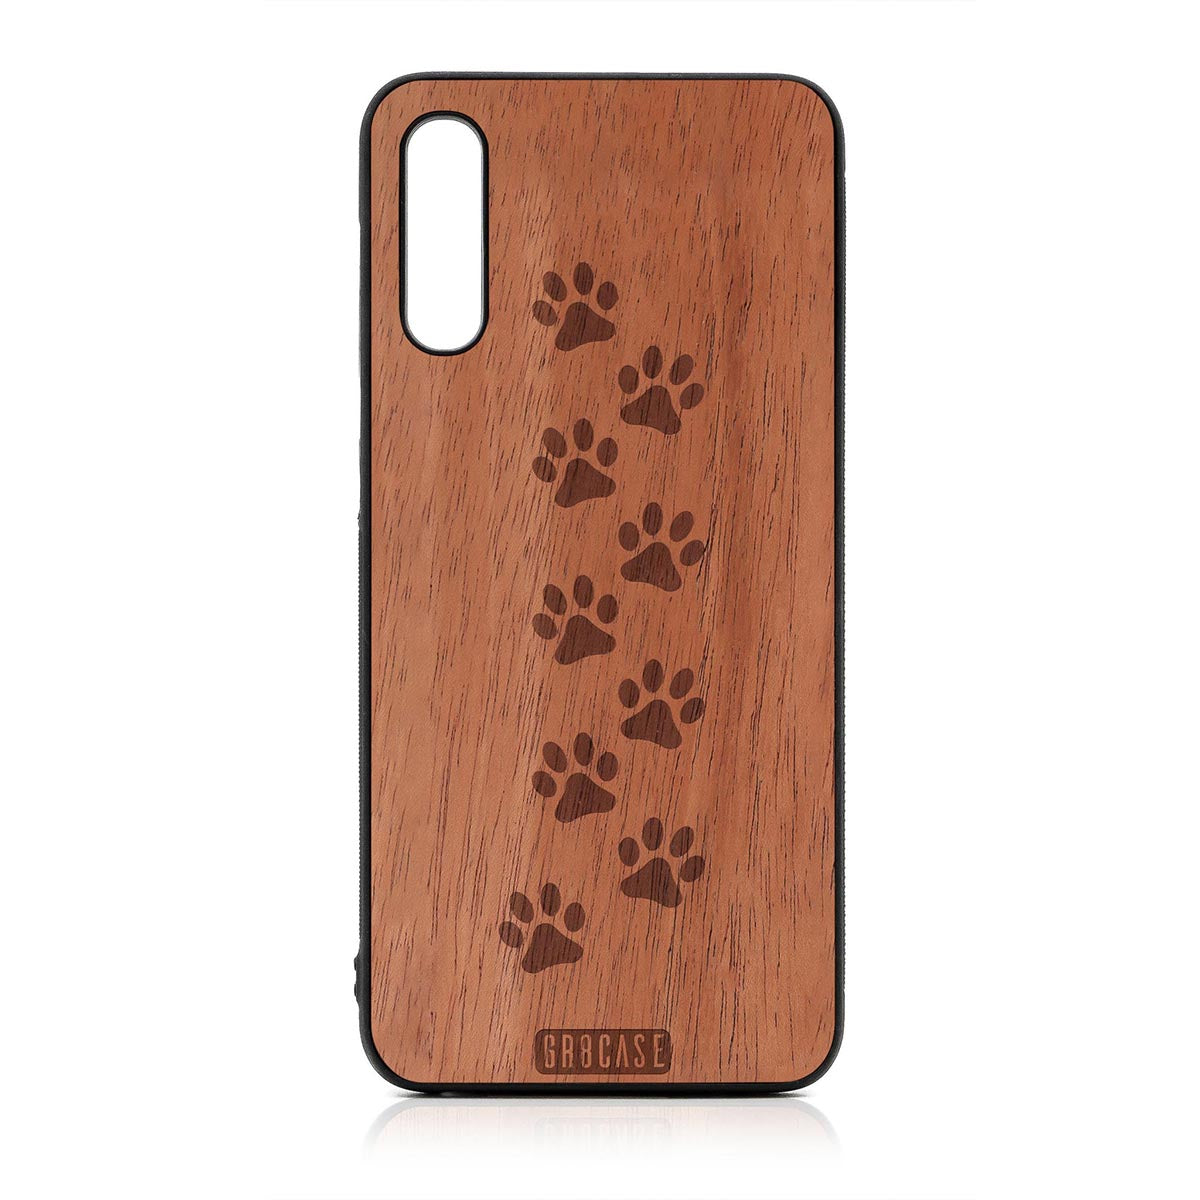 Paw Prints Design Wood Case For Samsung Galaxy A50 by GR8CASE